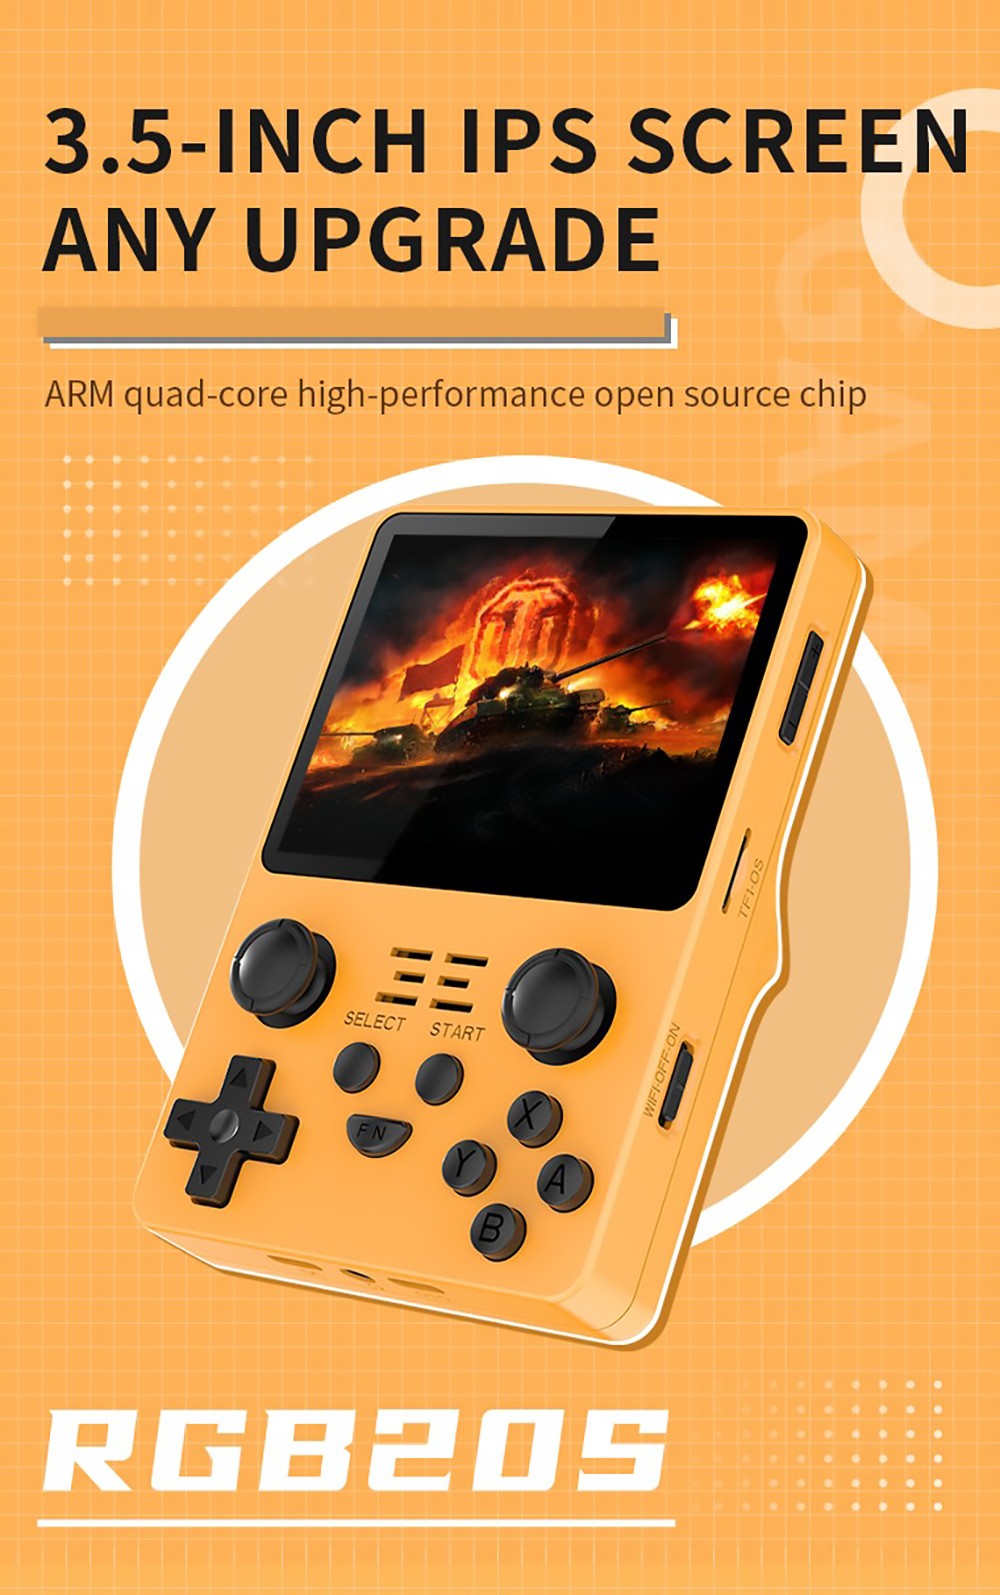 Powkiddy RGB20S Handheld Game Console 16+128GB 20,000 Games 3.5'' IPS OCA Screen Open Source for Linux - Orange